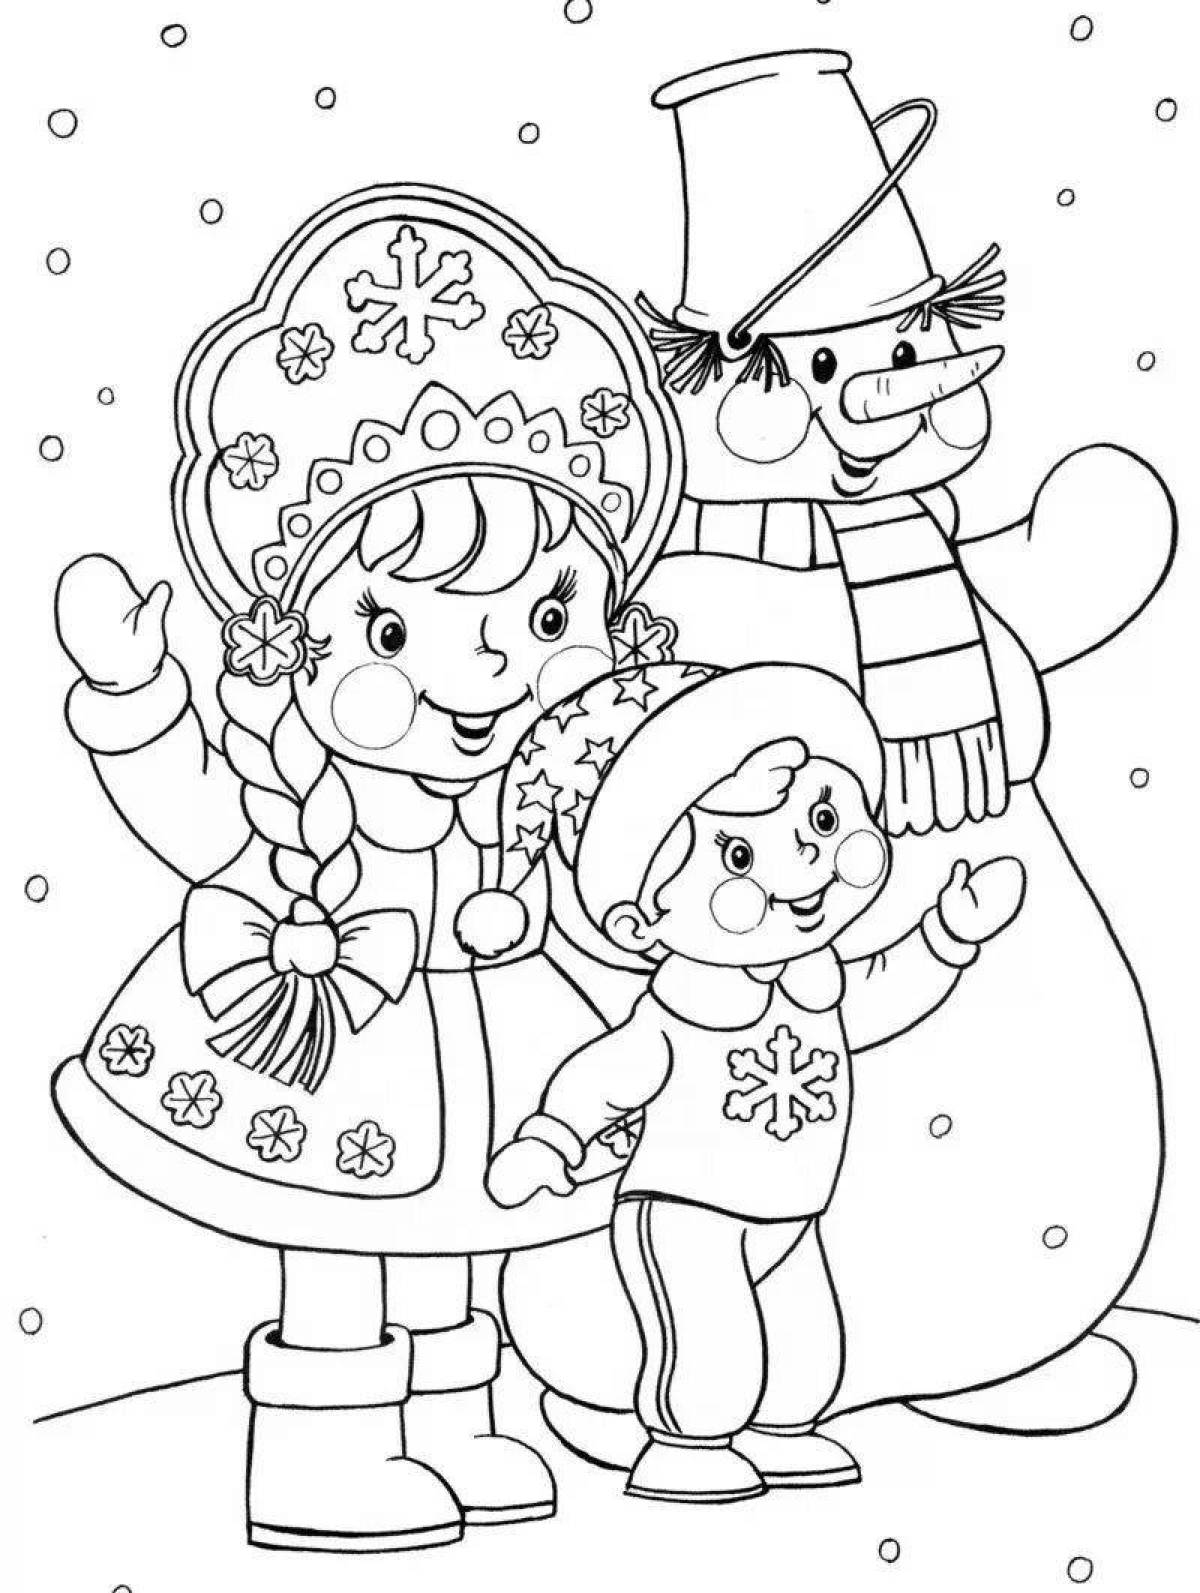 Fascinating Christmas coloring book for girls